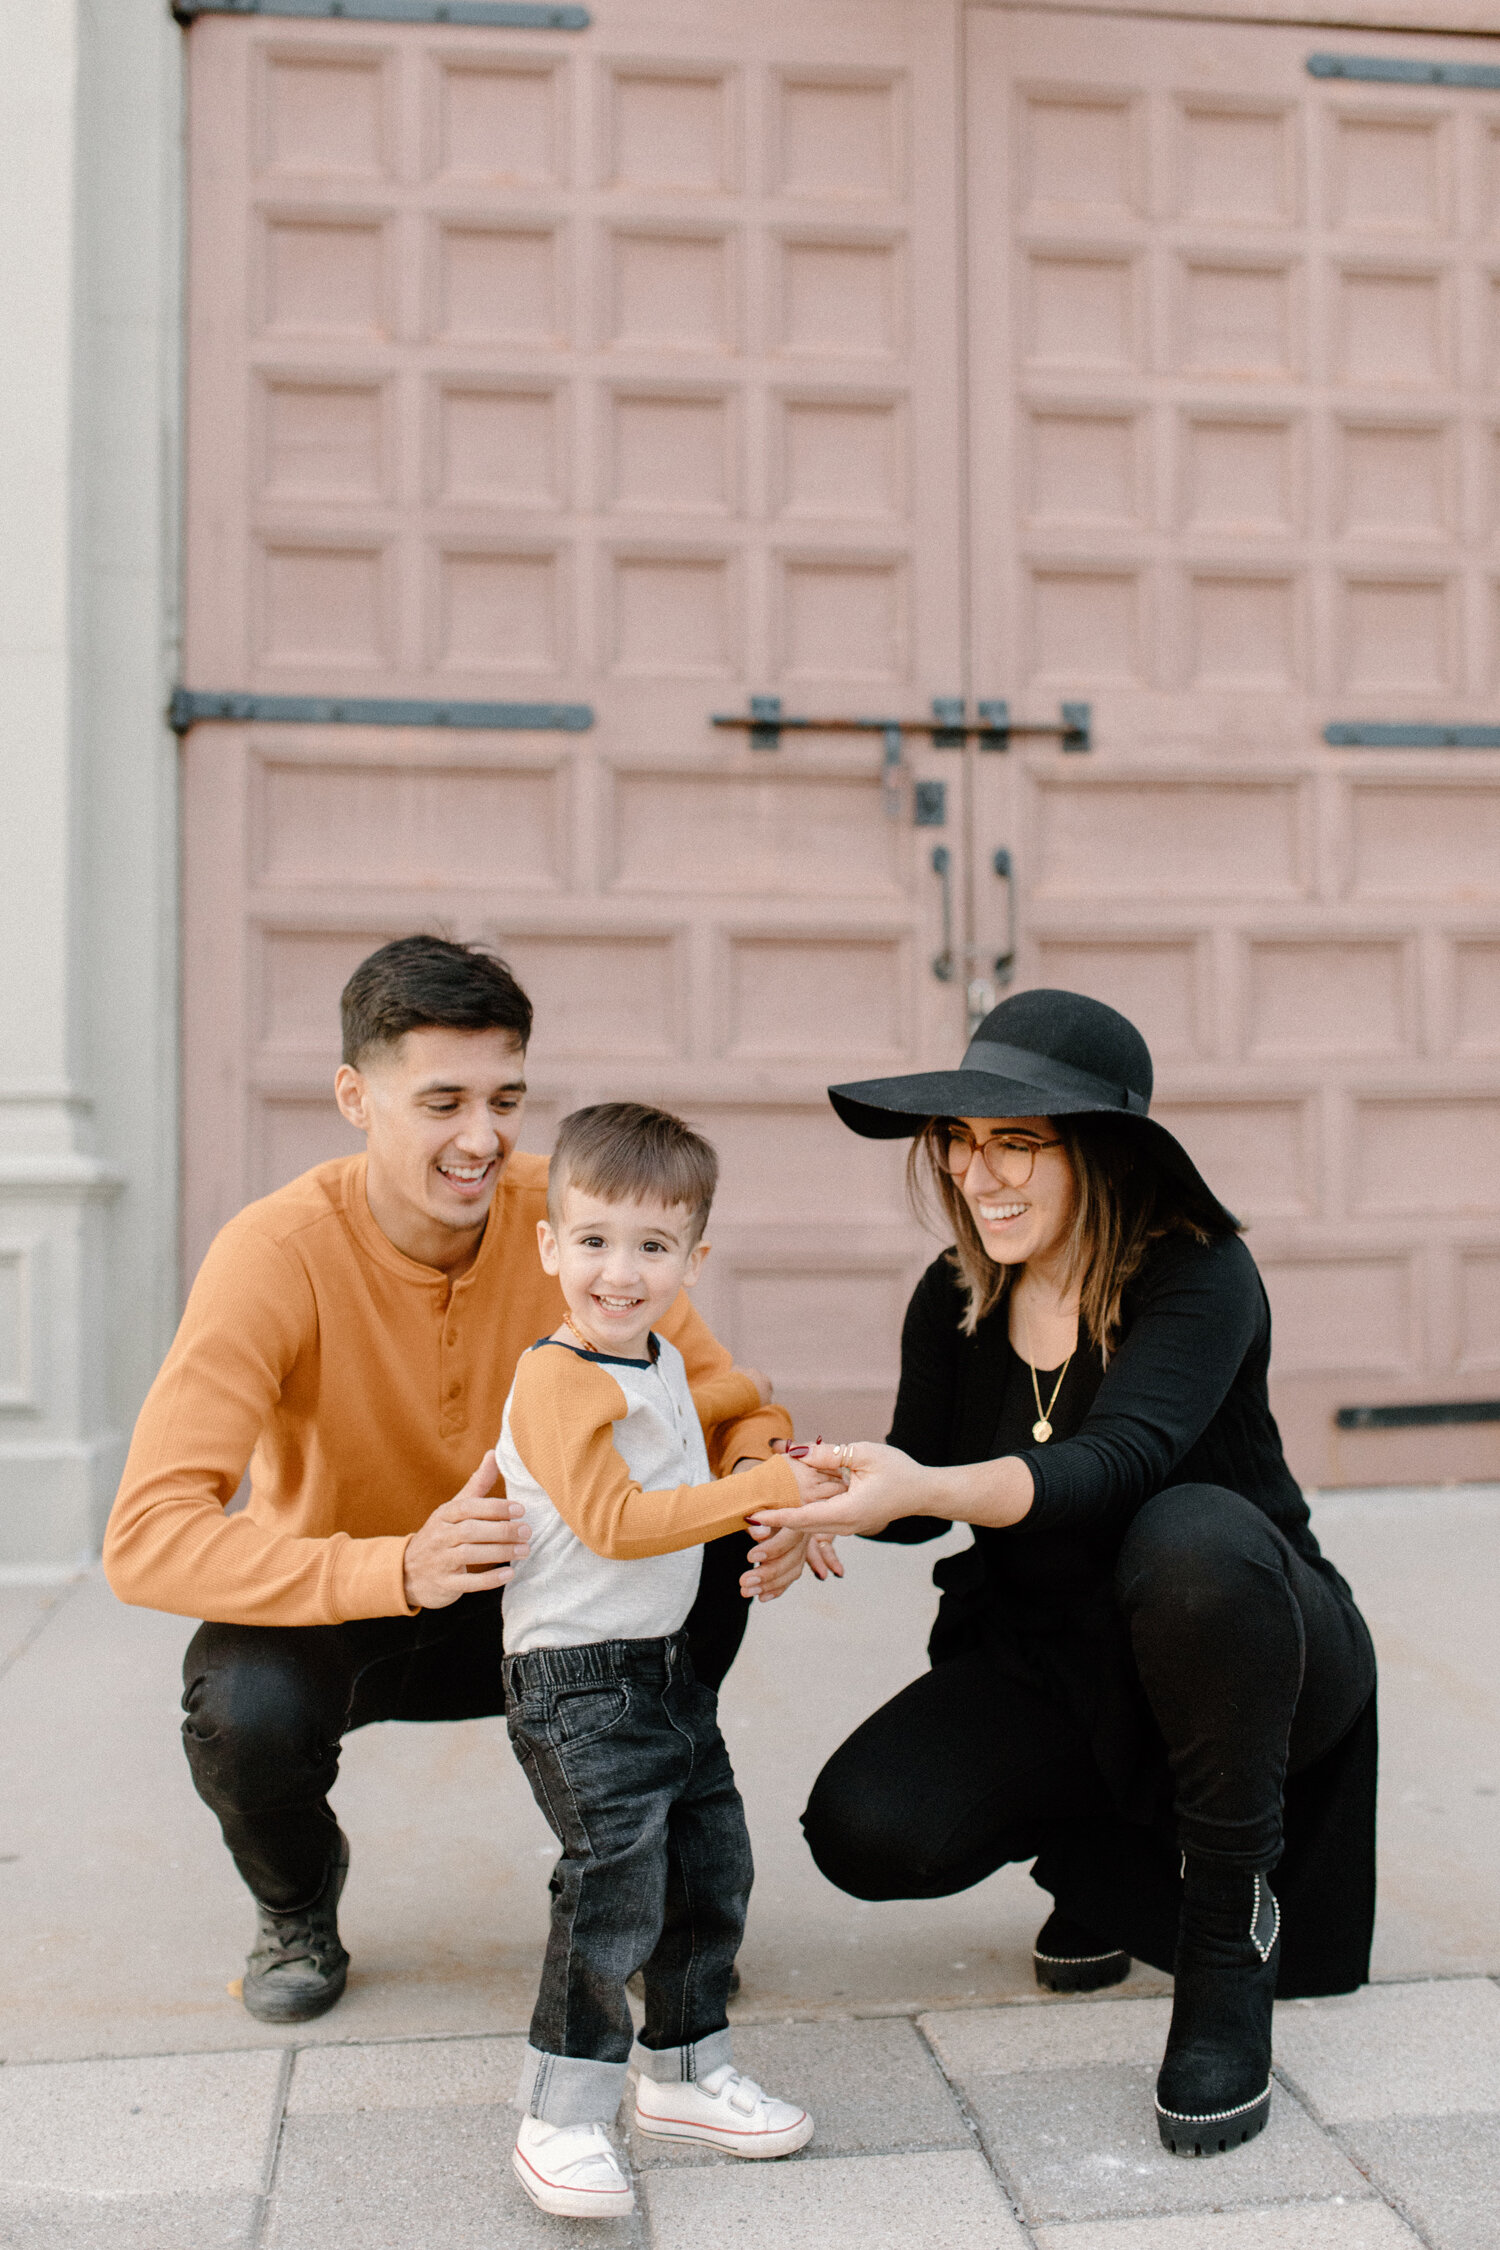  Ontario, Canada’s Chelsea Mason Photography captures this family of three holding hands and smiling during their family photo session. ontario canada family photographer orange and black family outfit colors photos urban ottawa canada engagement ses